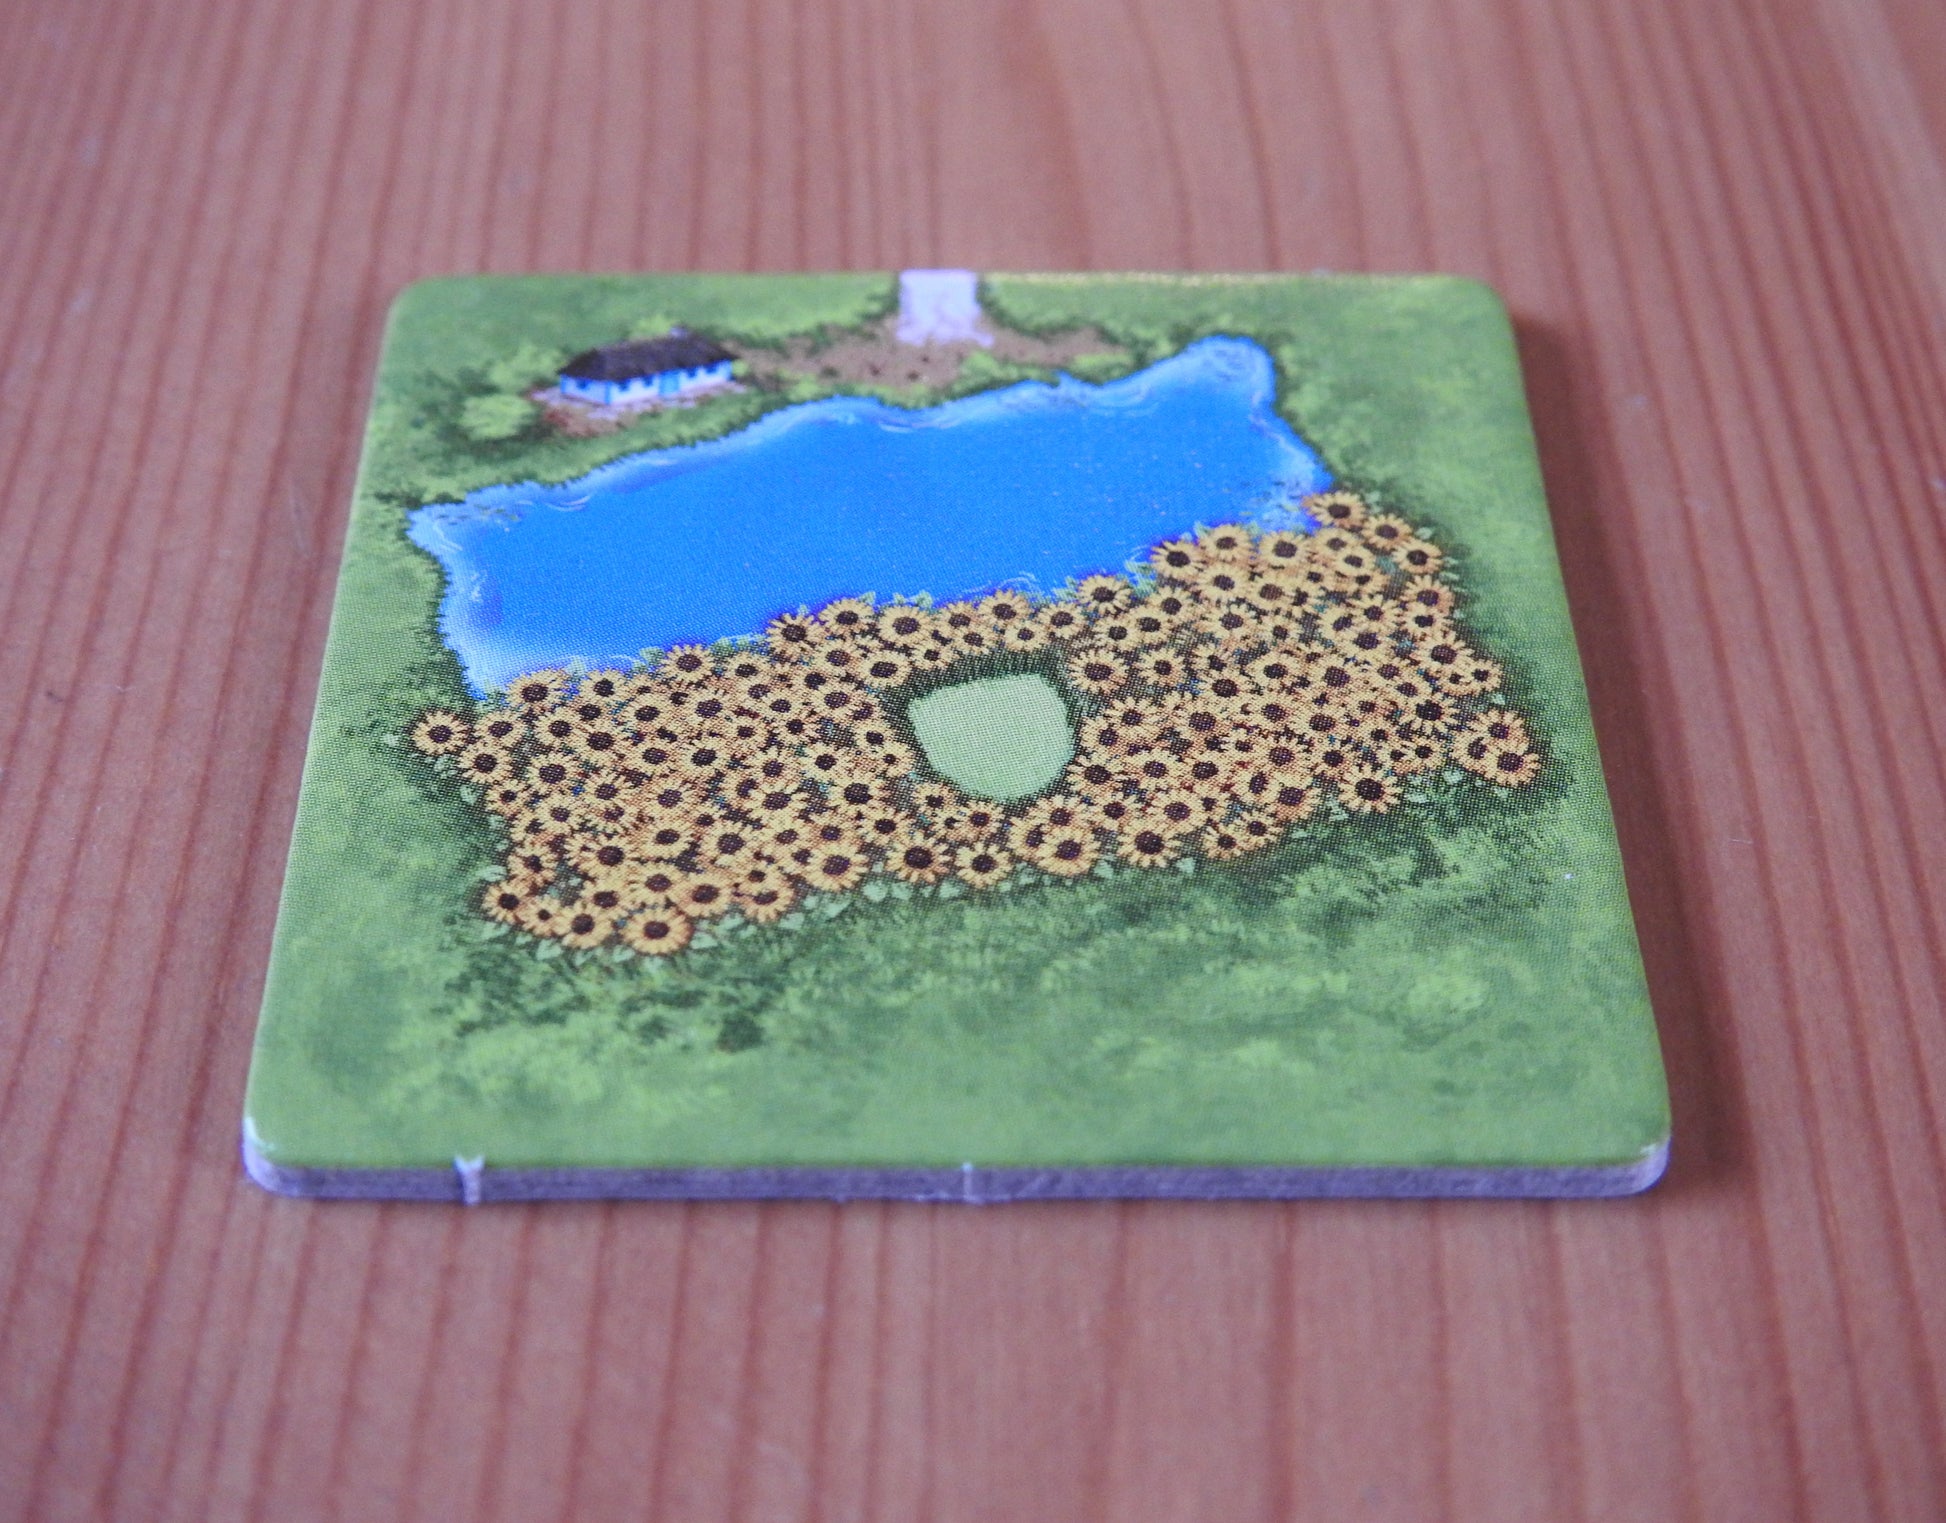 Another angle of the Carcassonne Ukraine Promo Tile.